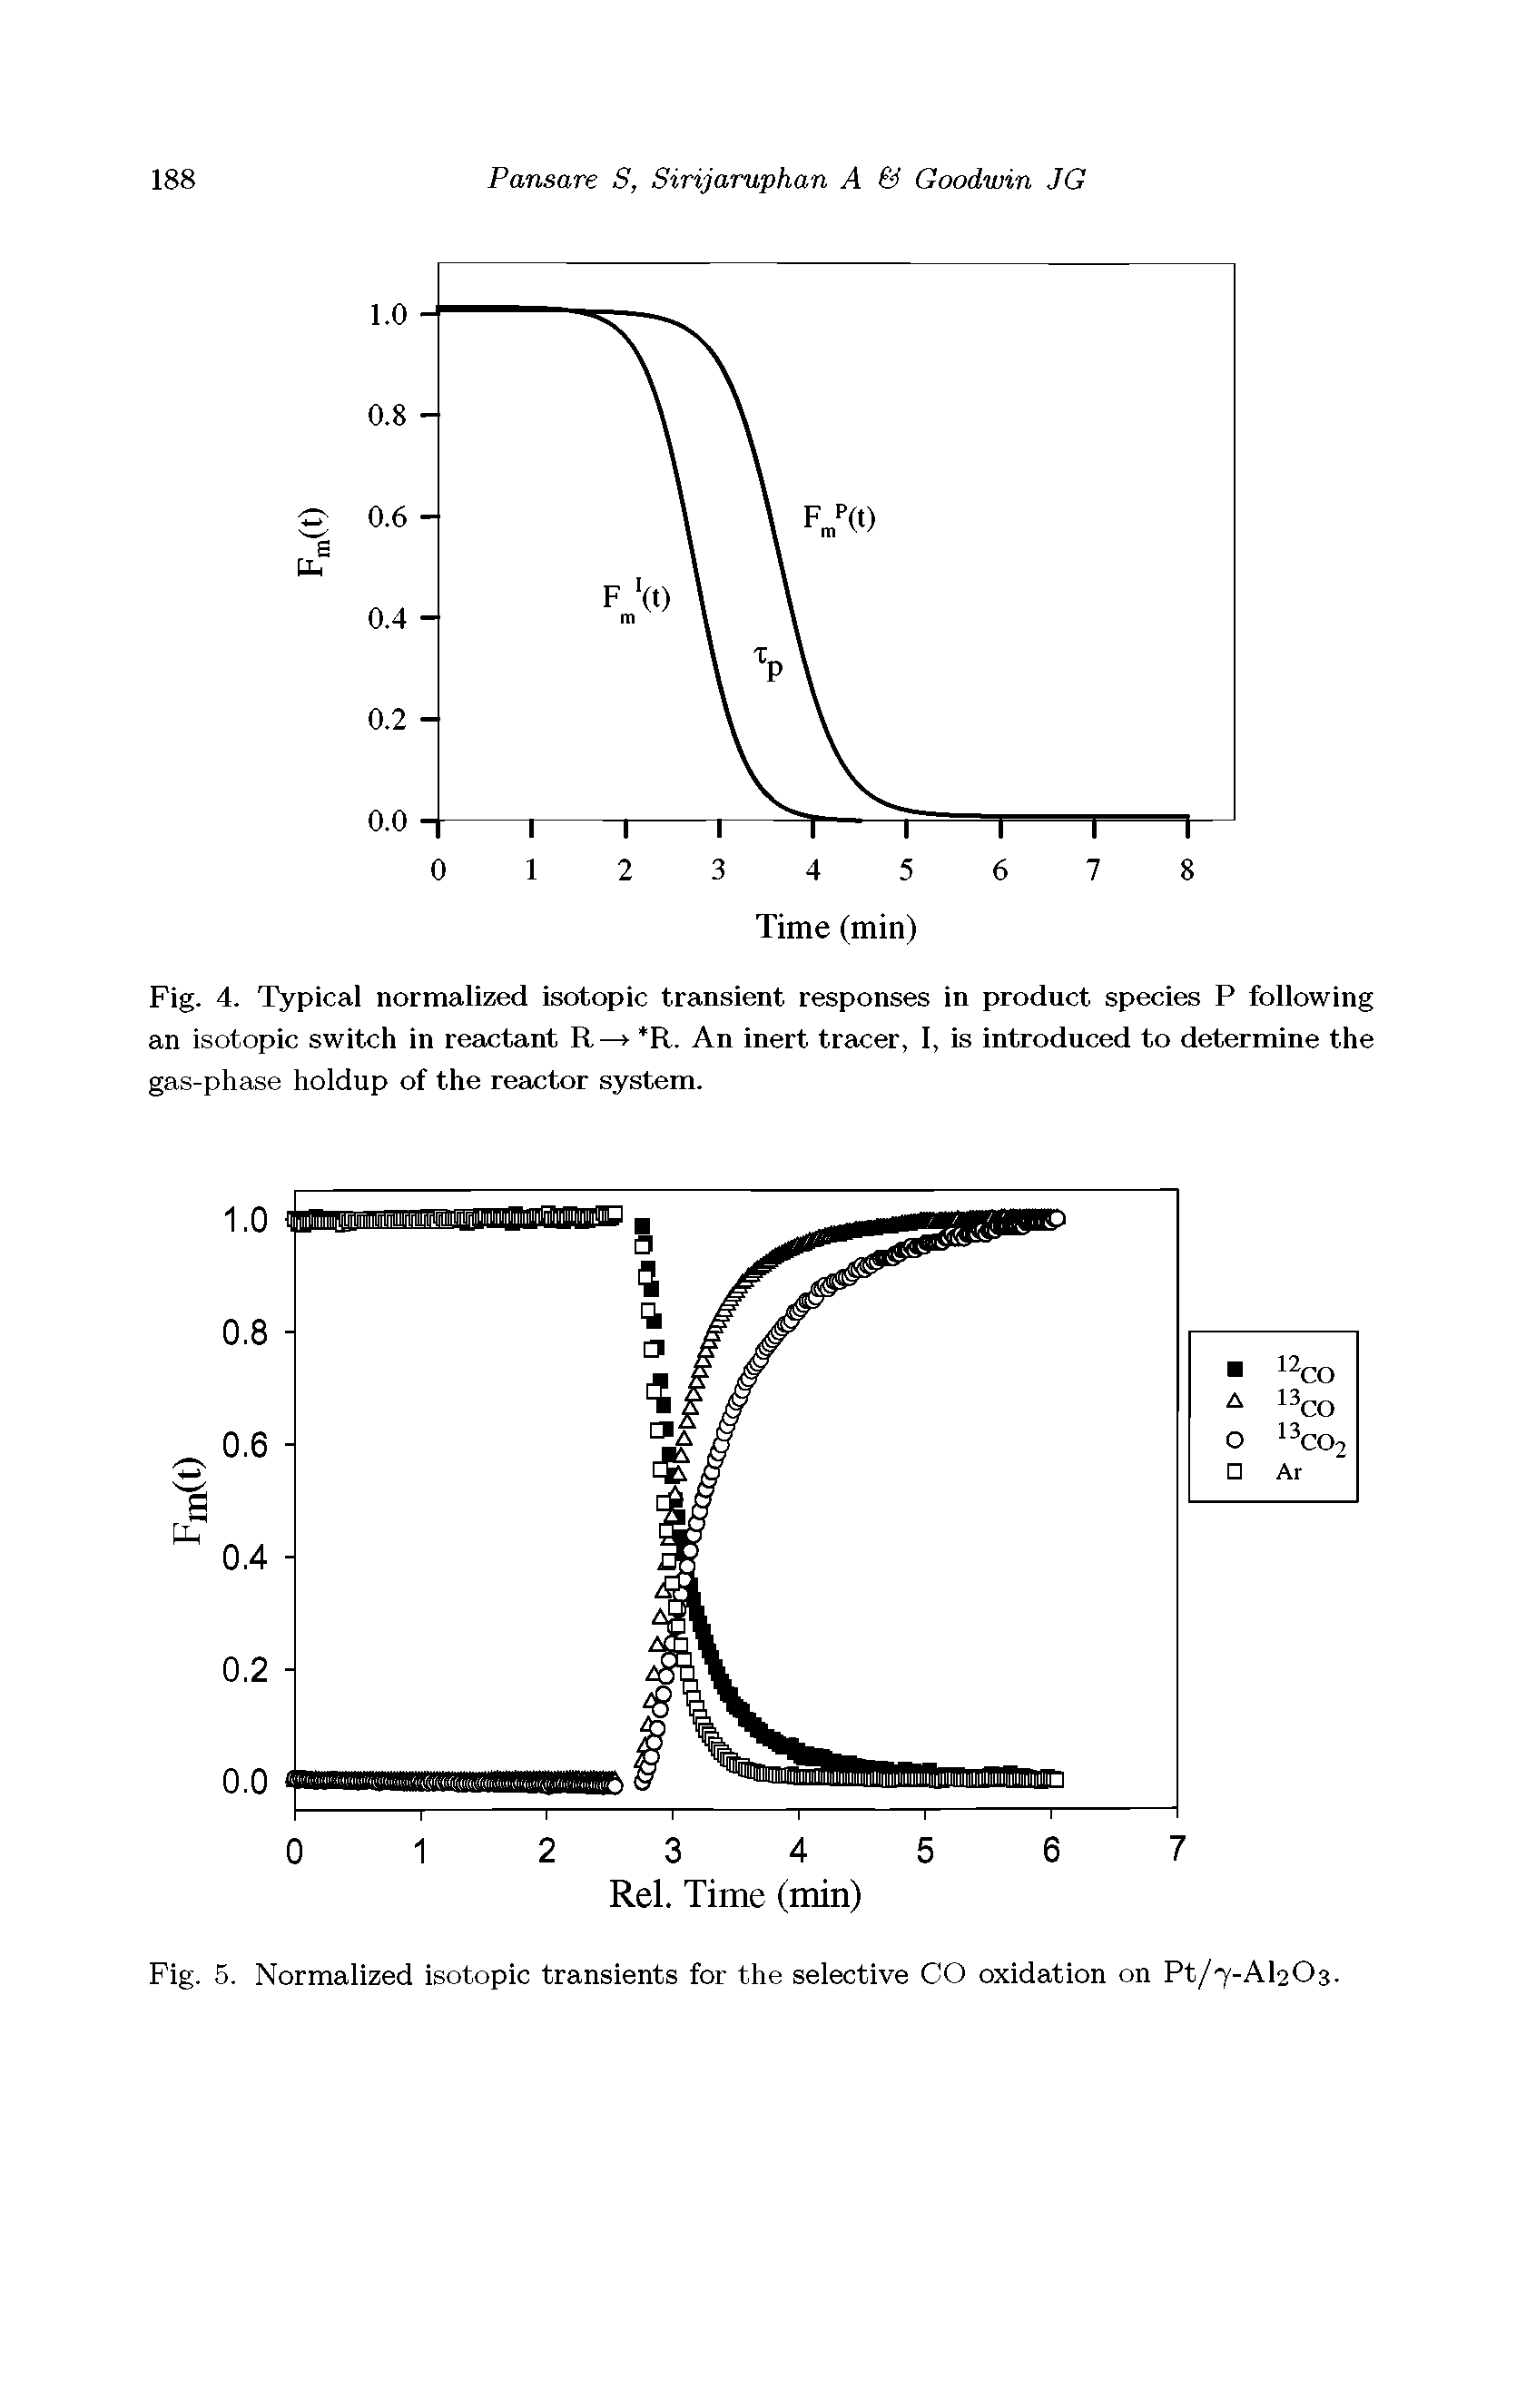 Fig. 4. Typical normalized isotopic transient responses in product species P following an isotopic switch in reactant R— R. An inert tracer, I, is introduced to determine the gas-phase holdup of the reactor system.